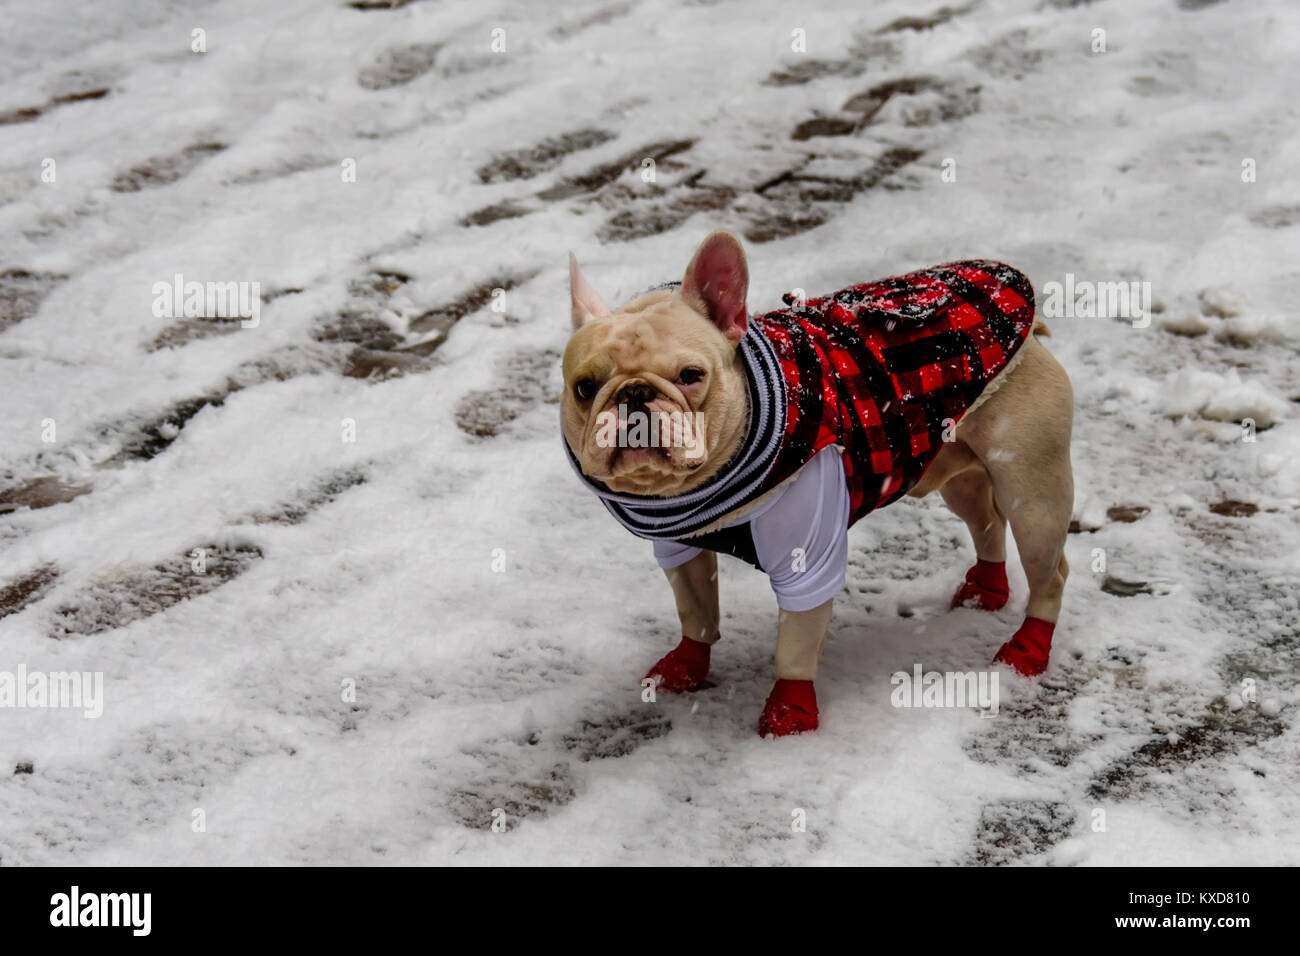 An animal, a dog, a French bulldog of white color, stands on the snow, dressed in plaid clothes, red and black, red socks and a scarf in black and whi Stock Photo